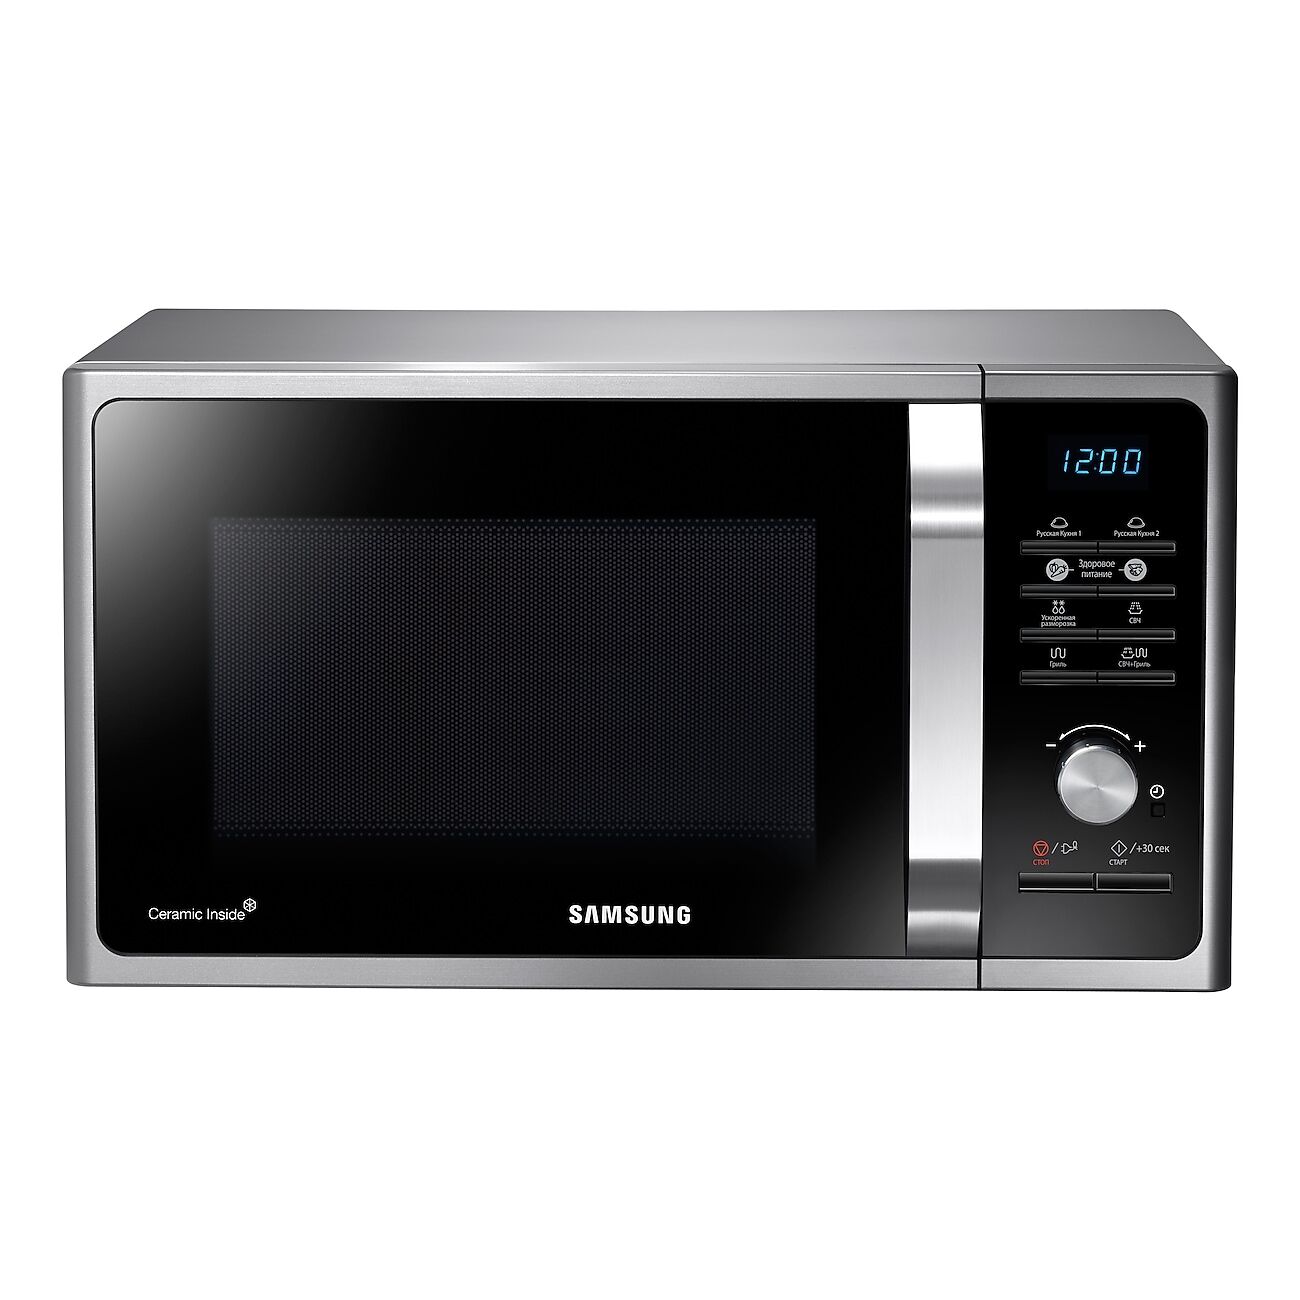 Samsung MWF300G 23L Black Solo Microwave Oven with Healthy Cooking